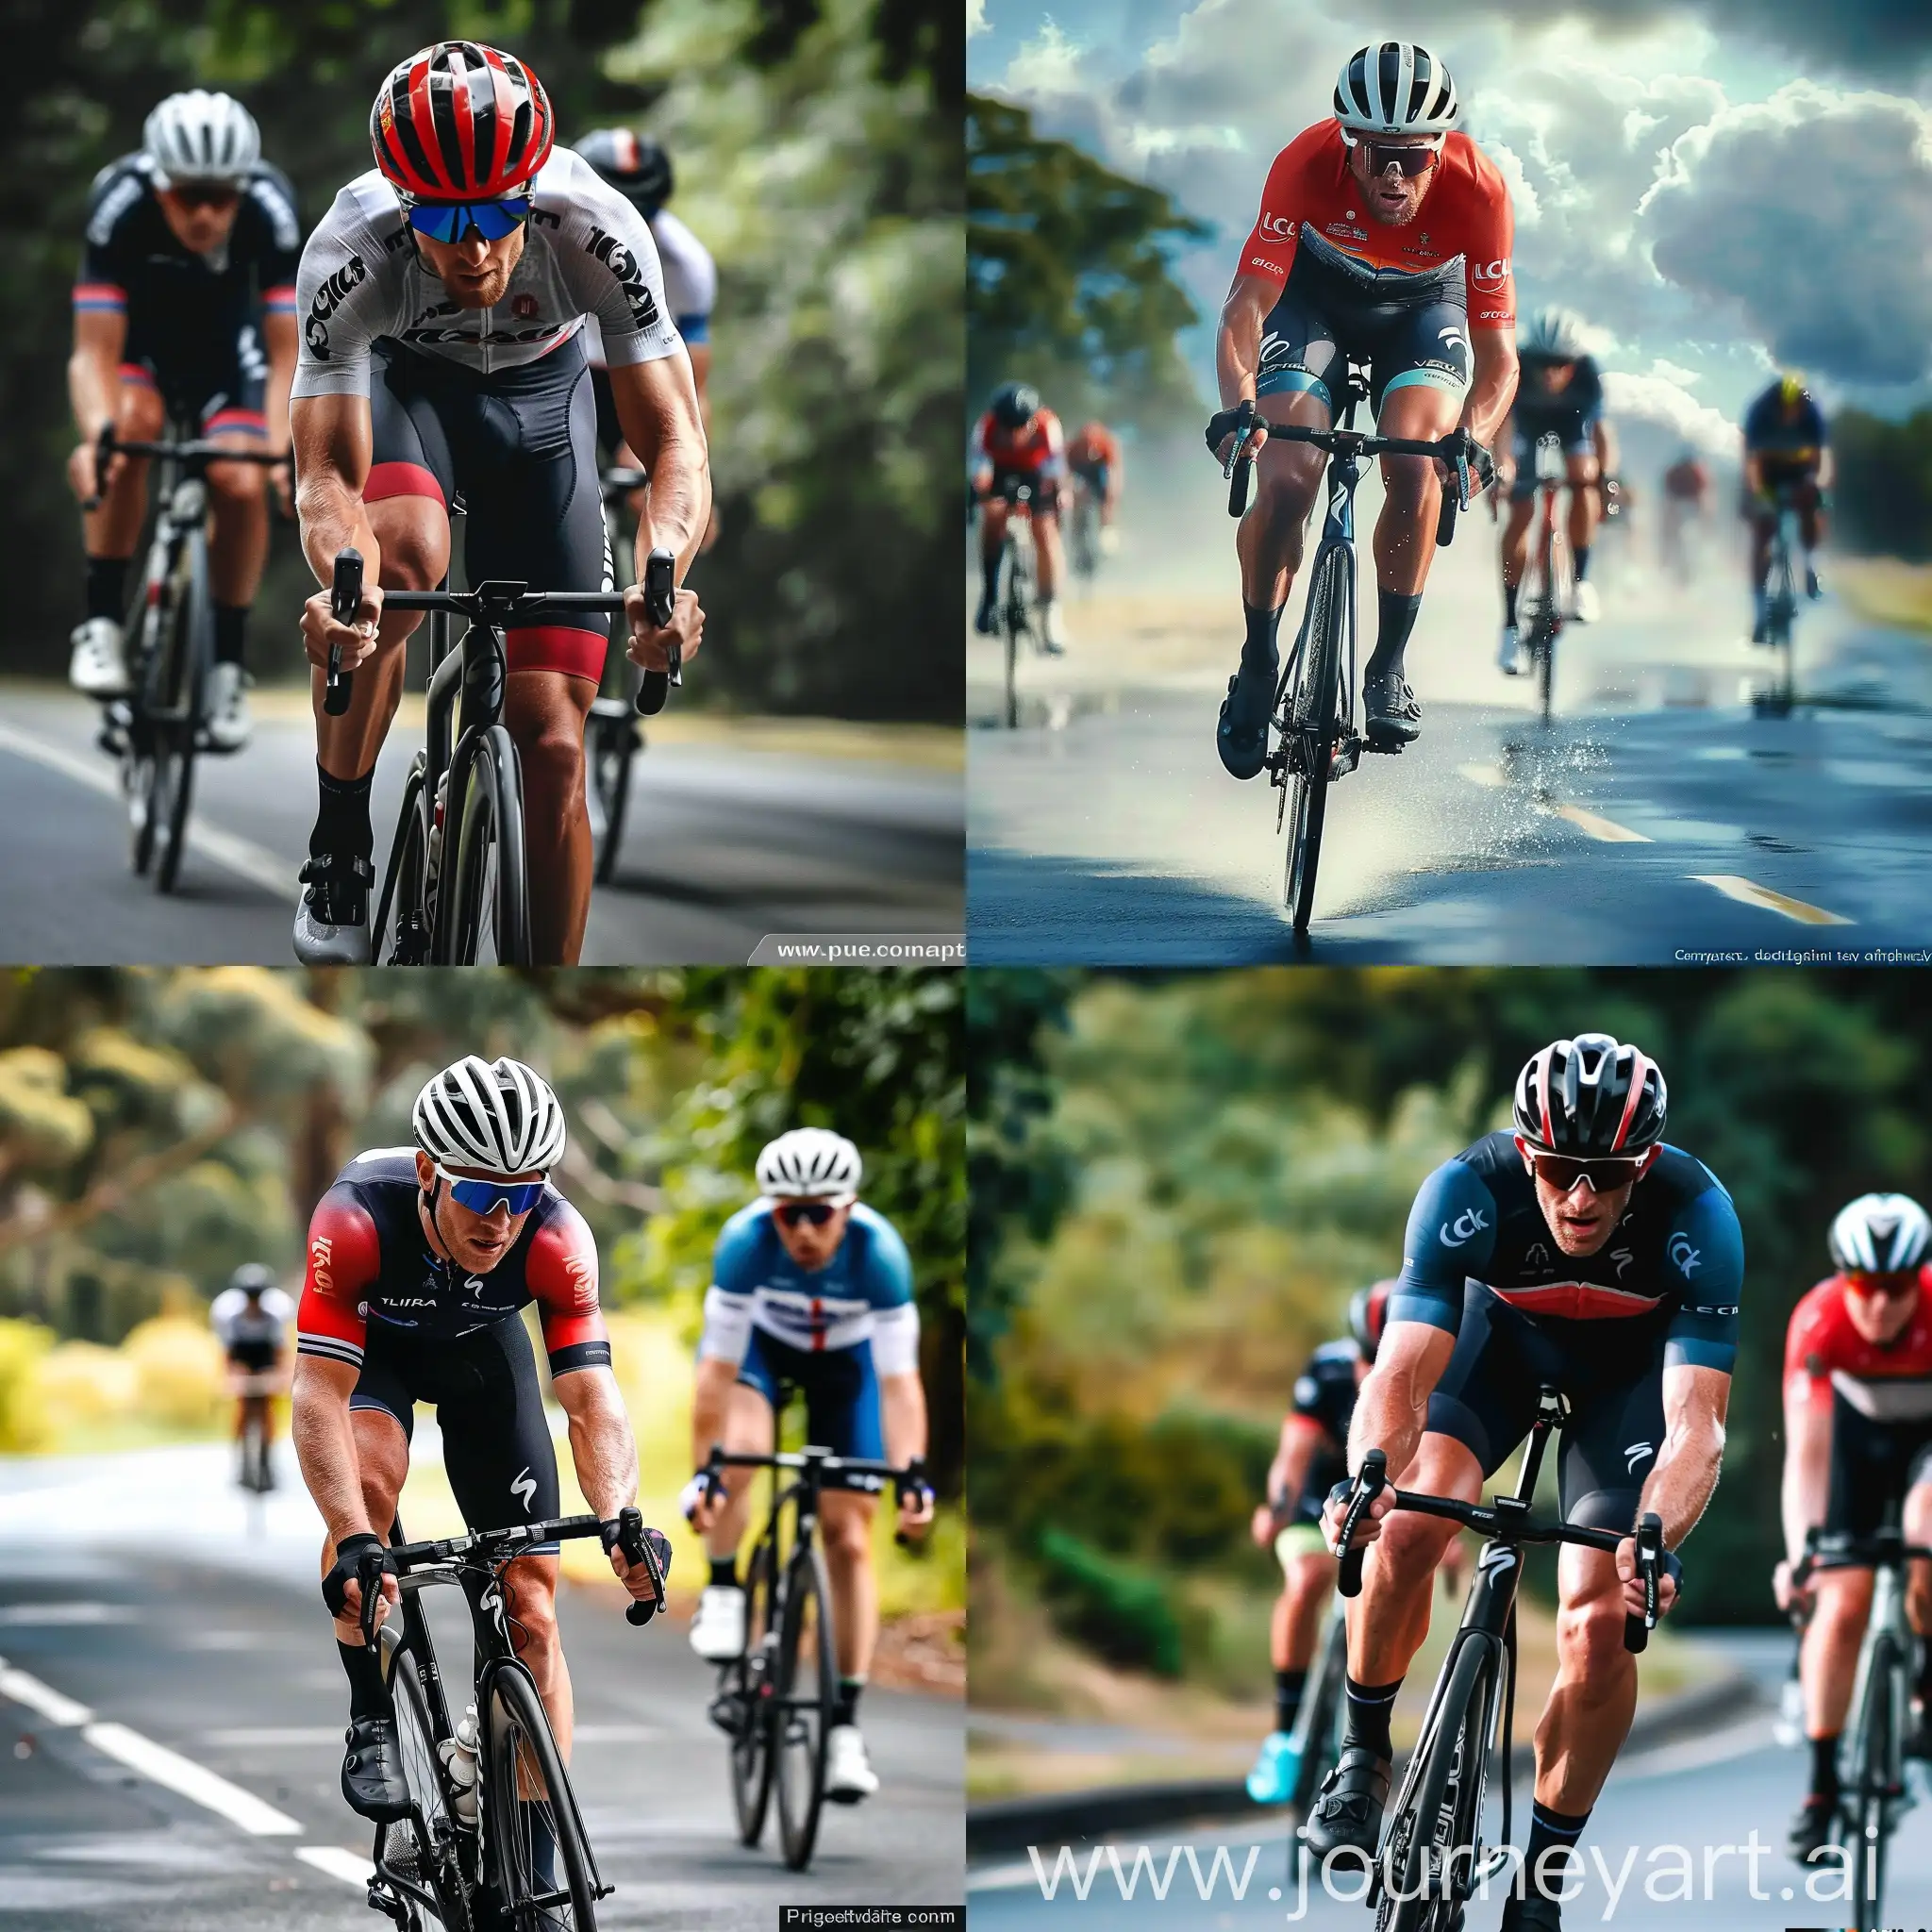 a realistic photo of a Compare the physical and mental strength required for competitive cycling, demonstrating the importance of discipline and focus in this demanding sport.  [I need a video for a professional cyclist]. use this image as an example [https://image.pollinations.ai/prompt/Compare%20the%20physical%20and%20mental%20strength%20required%20for%20competitive%20cycling,%20demonstrating%20the%20importance%20of%20discipline%20and%20focus%20in%20this%20demanding%20sport%20I%20need%20a%20video%20for%20a%20profession] --ar 1:1 --stylize 750 --v 6